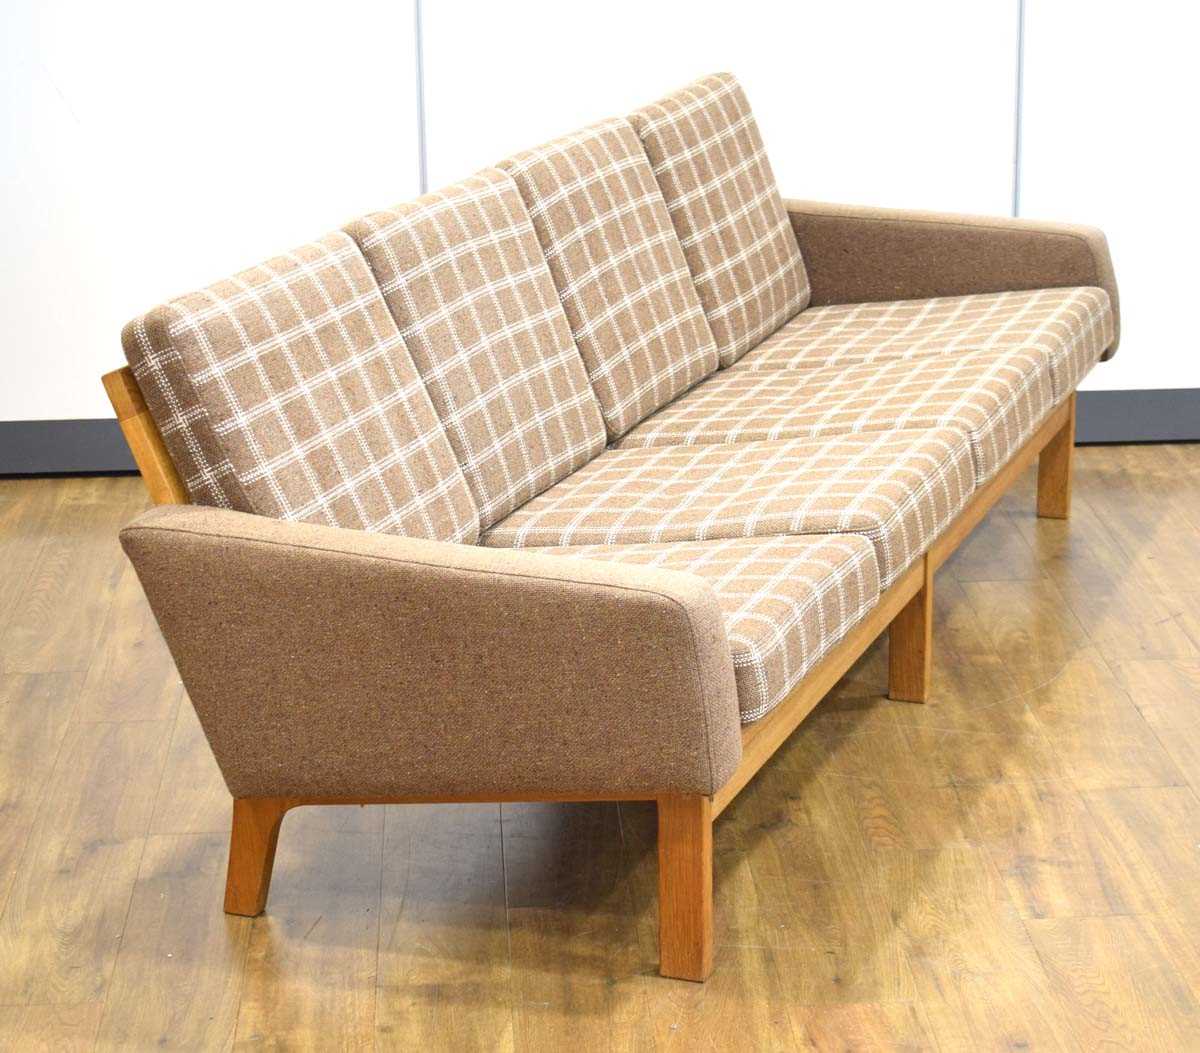 A 1960's oak framed three-seater sofa upholstered in green and white check fabric, w. 228 cm *Sold - Image 2 of 2